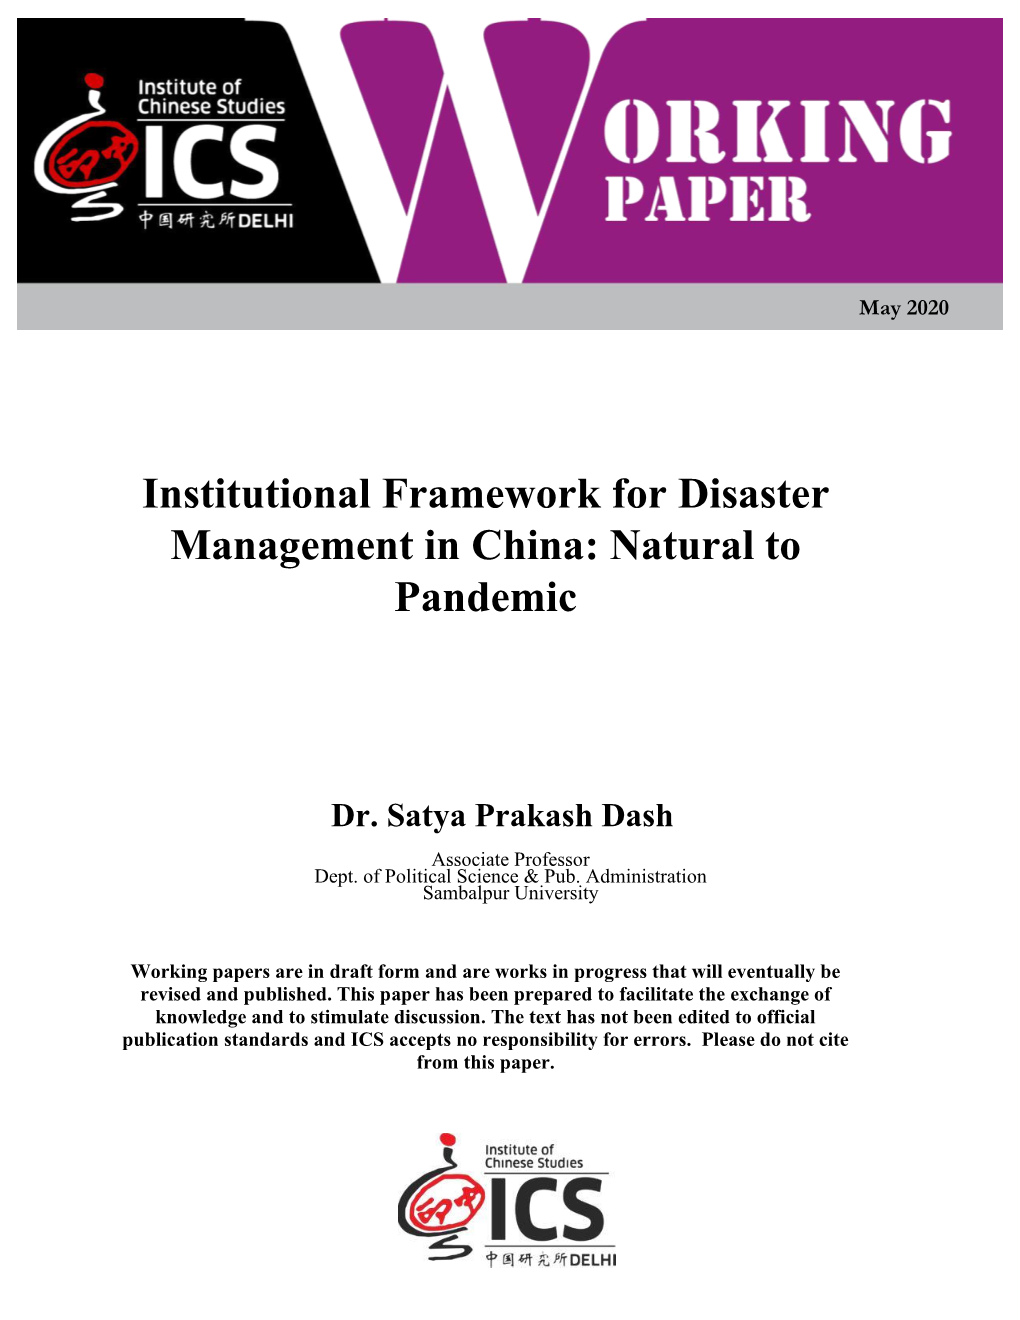 Institutional Framework for Disaster Management in China: Natural to Pandemic